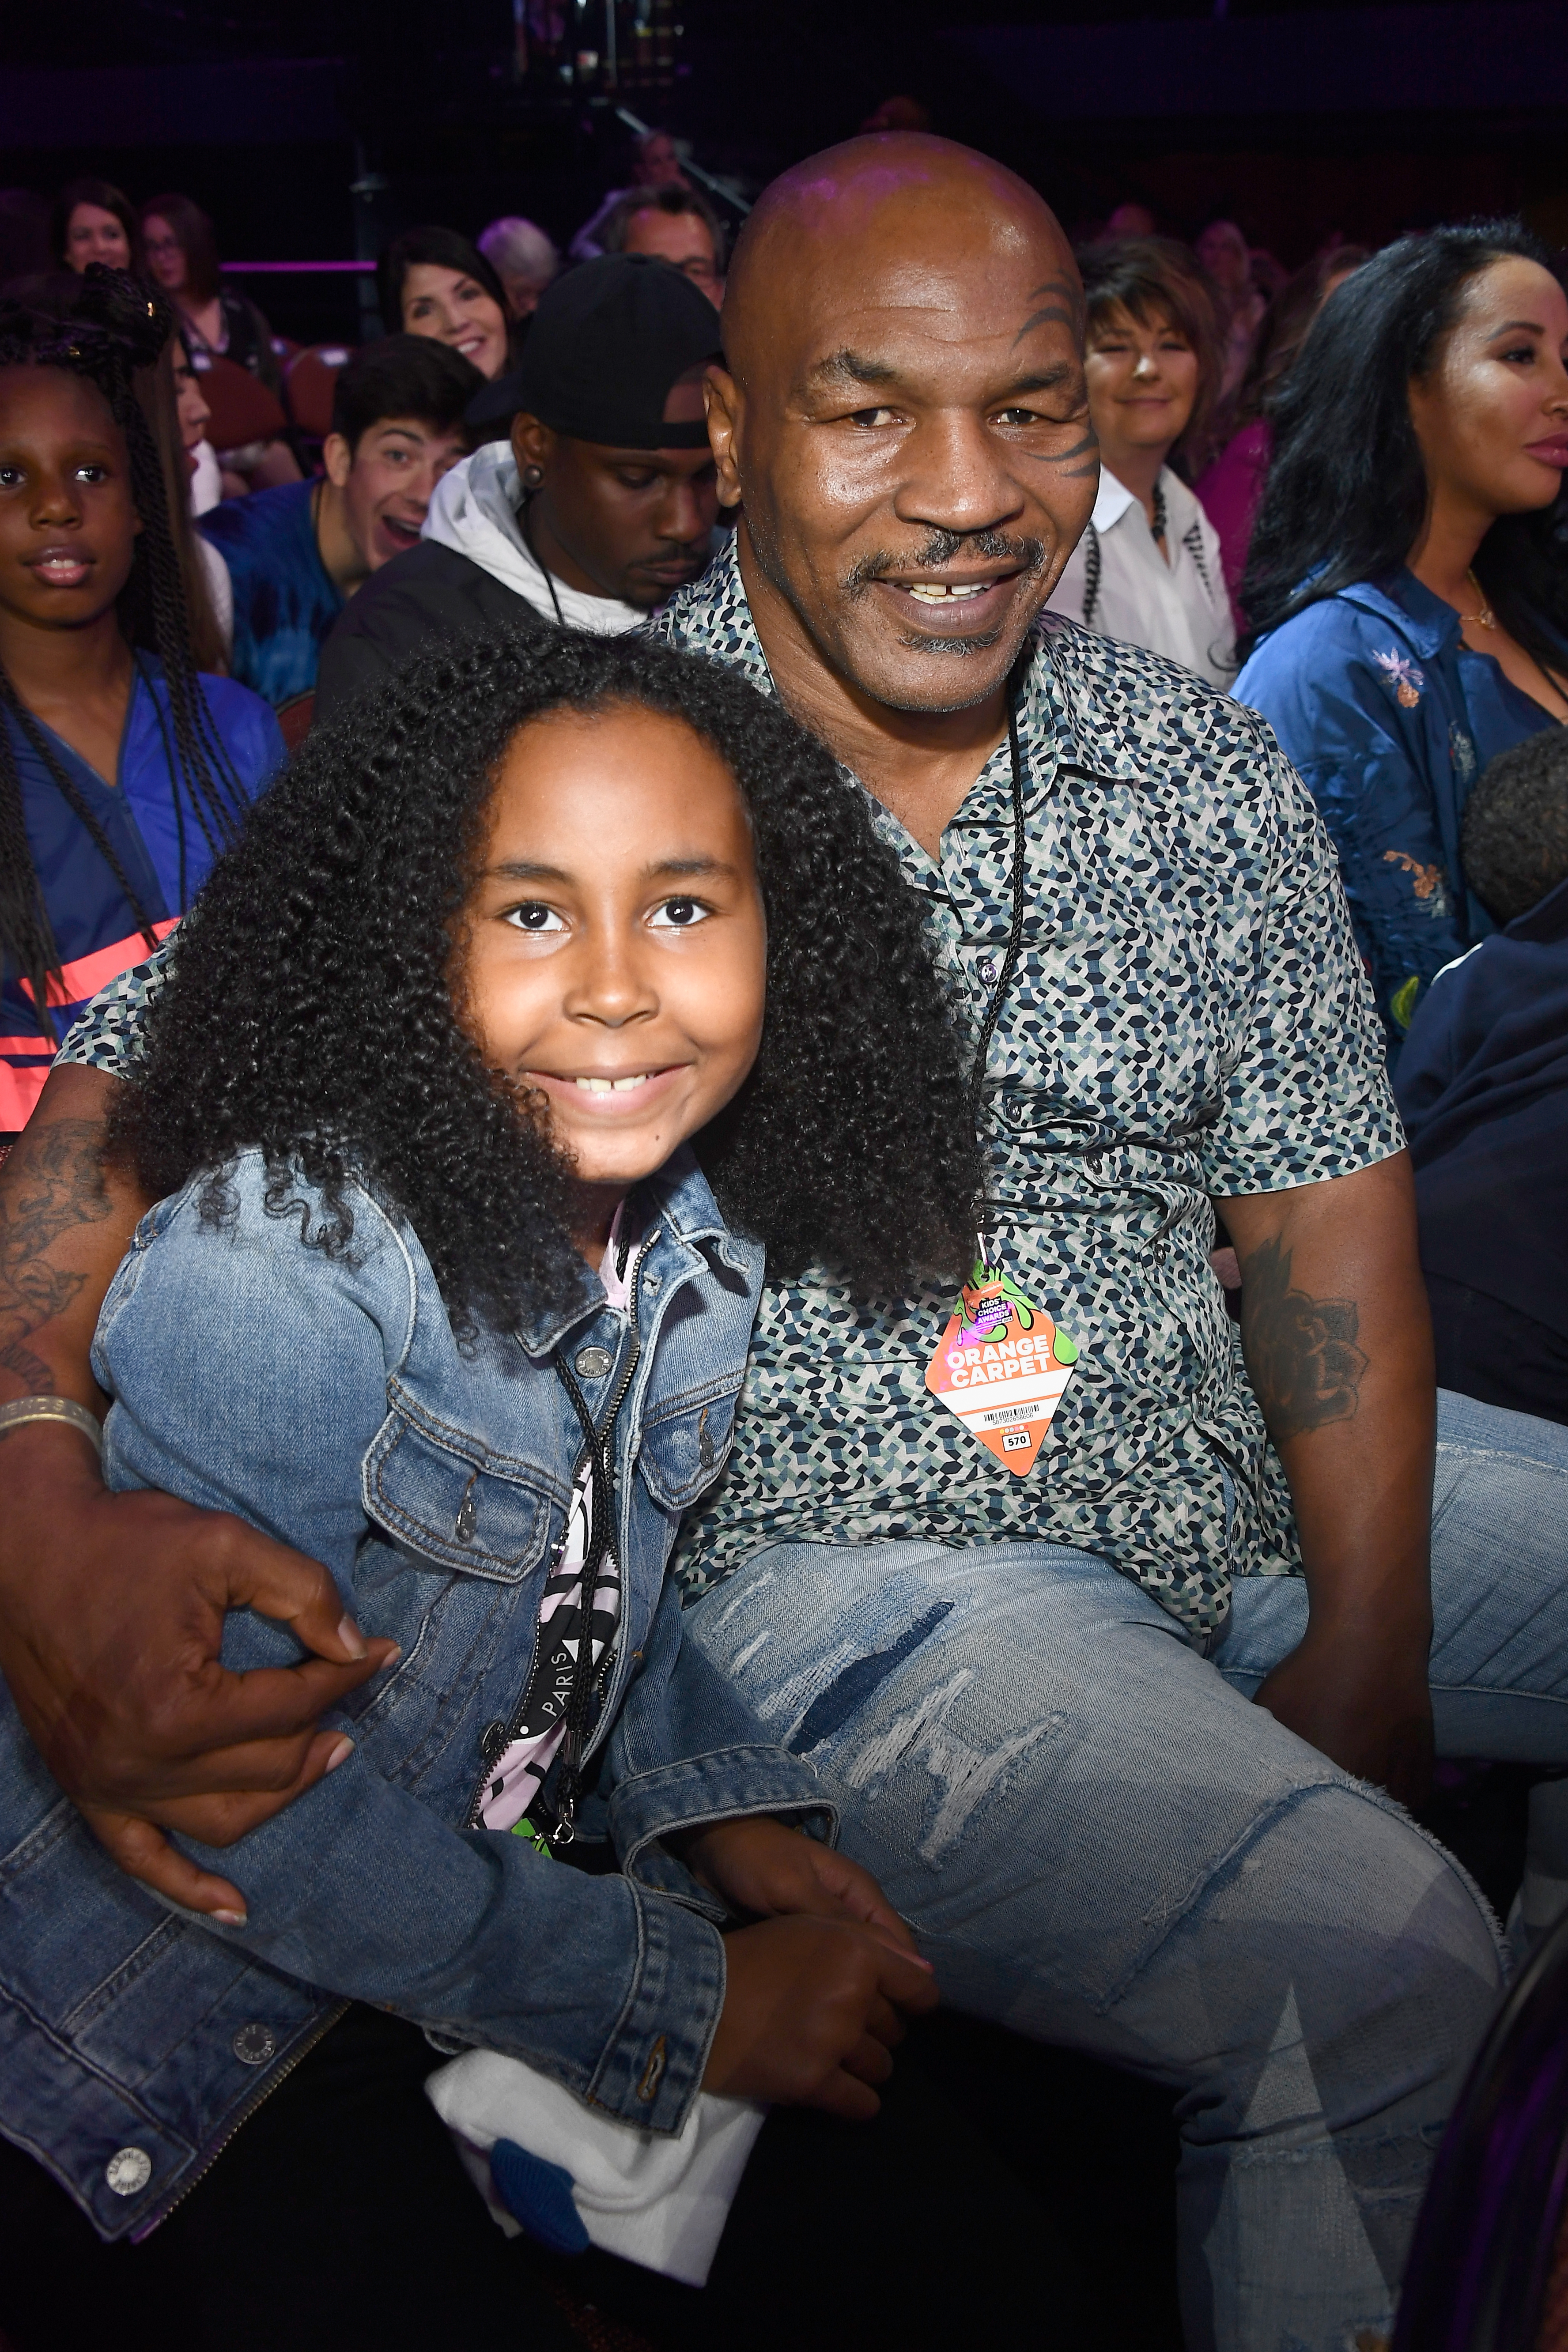 Milan Tyson and her dad, Mike Tyson, at Nickelodeon's 2018 Kids' Choice Awards, held at The Forum in Inglewood, California, on March 24, 2018 | Source: Getty Images